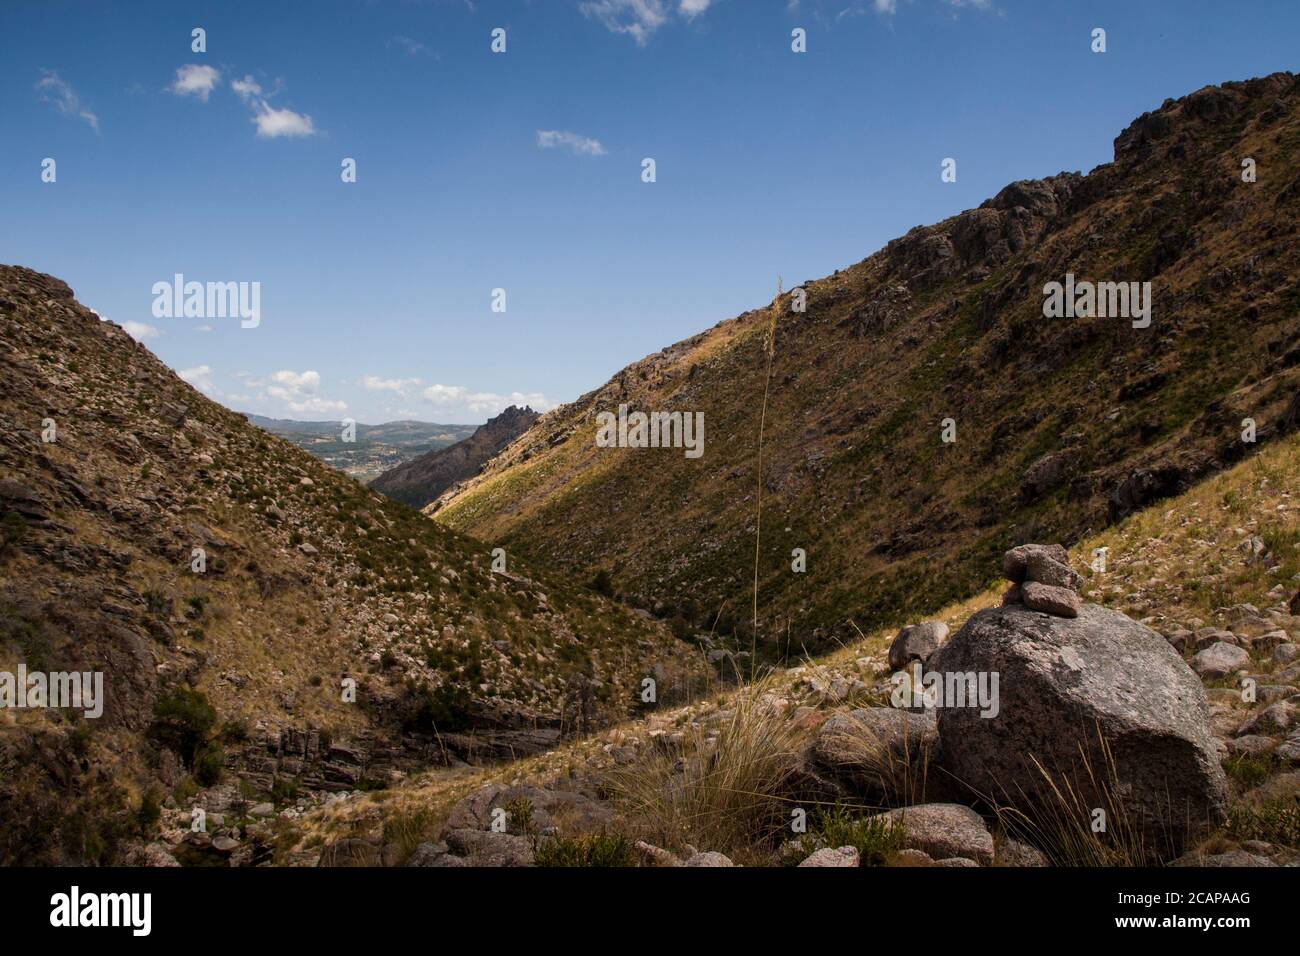 Mountain valley landscape under blue sky and mountain guiding stones on first plane Stock Photo